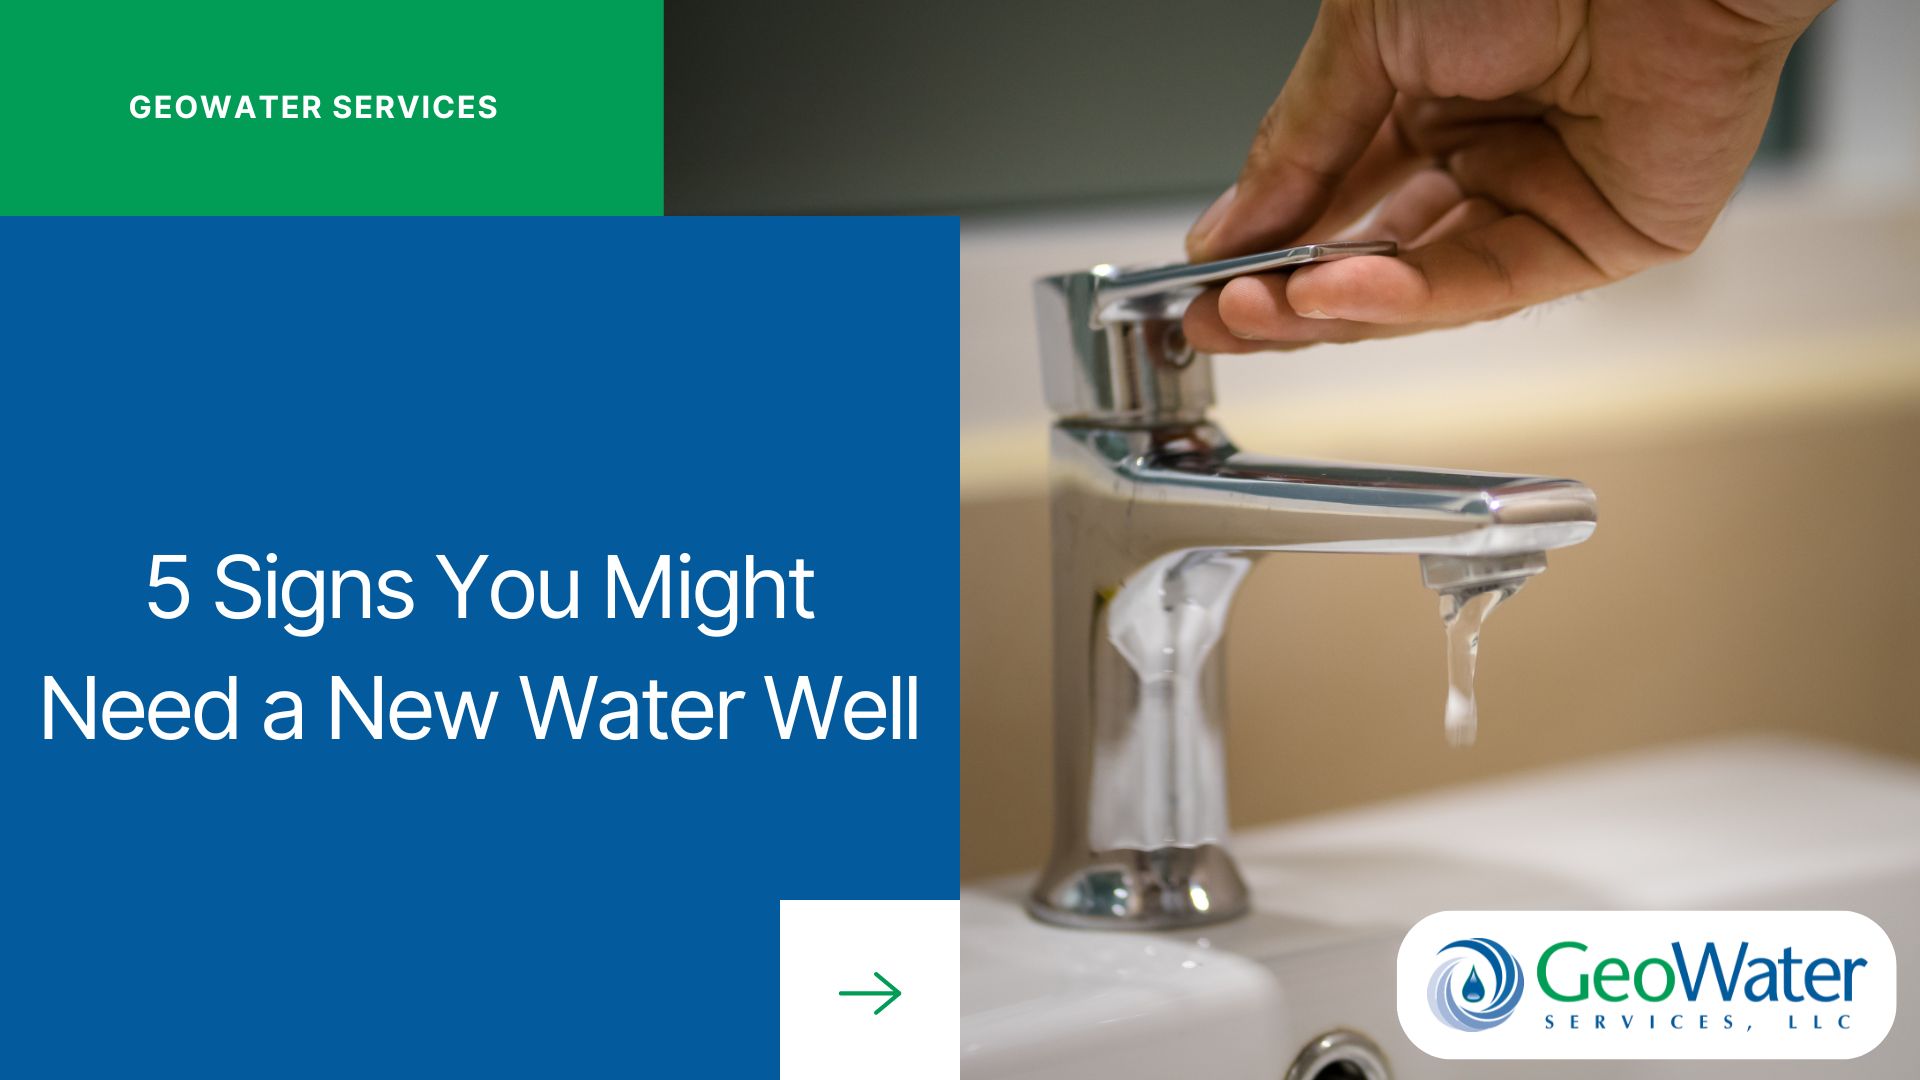 5 Signs You Might Need a New Water Well